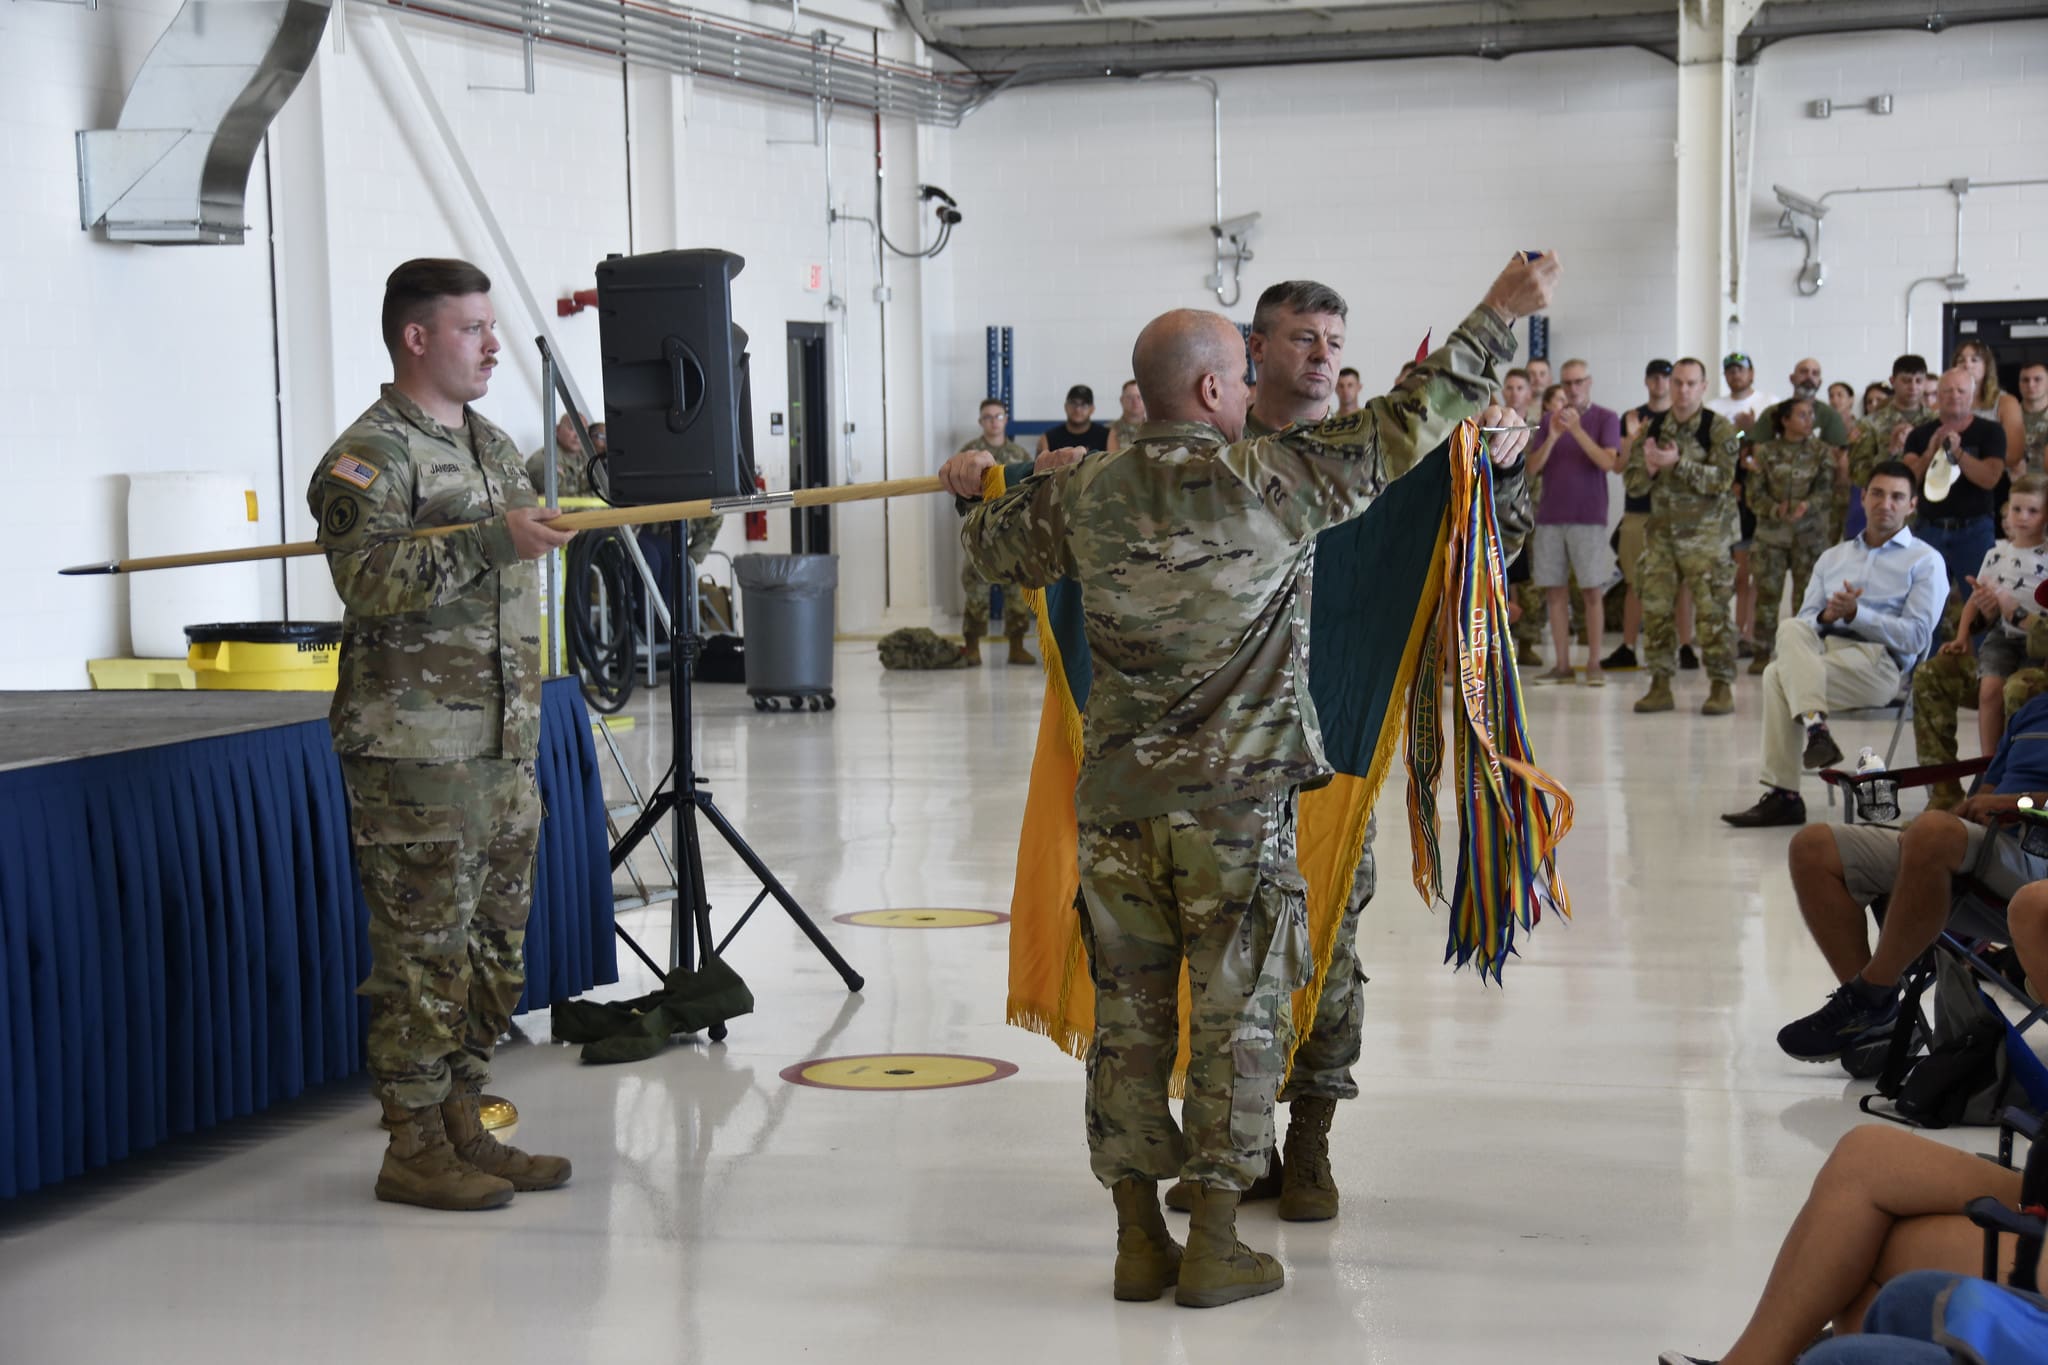 Col. Eric Leckel and Command Sgt. Maj. Duane Weier, commander and senior enlisted leader of the Wisconsin Army National Guard’s 157th Maneuver Enhancement Brigade, uncase the brigade flag, signifying the unit’s return to the Wisconsin National Guard, during a welcome home ceremony July 29 at the 115th Fighter Wing in Madison, Wis. The 157th returned from a nine-month deployment to Djibouti, Africa in support of Combined Joint Task Force-Horn of Africa, which conducts operations to enhance partner nation capacity, promote regional stability, dissuade conflict, and protect U.S. and coalition interests. Wisconsin Department of Military Affairs photo by Vaughn R. Larson